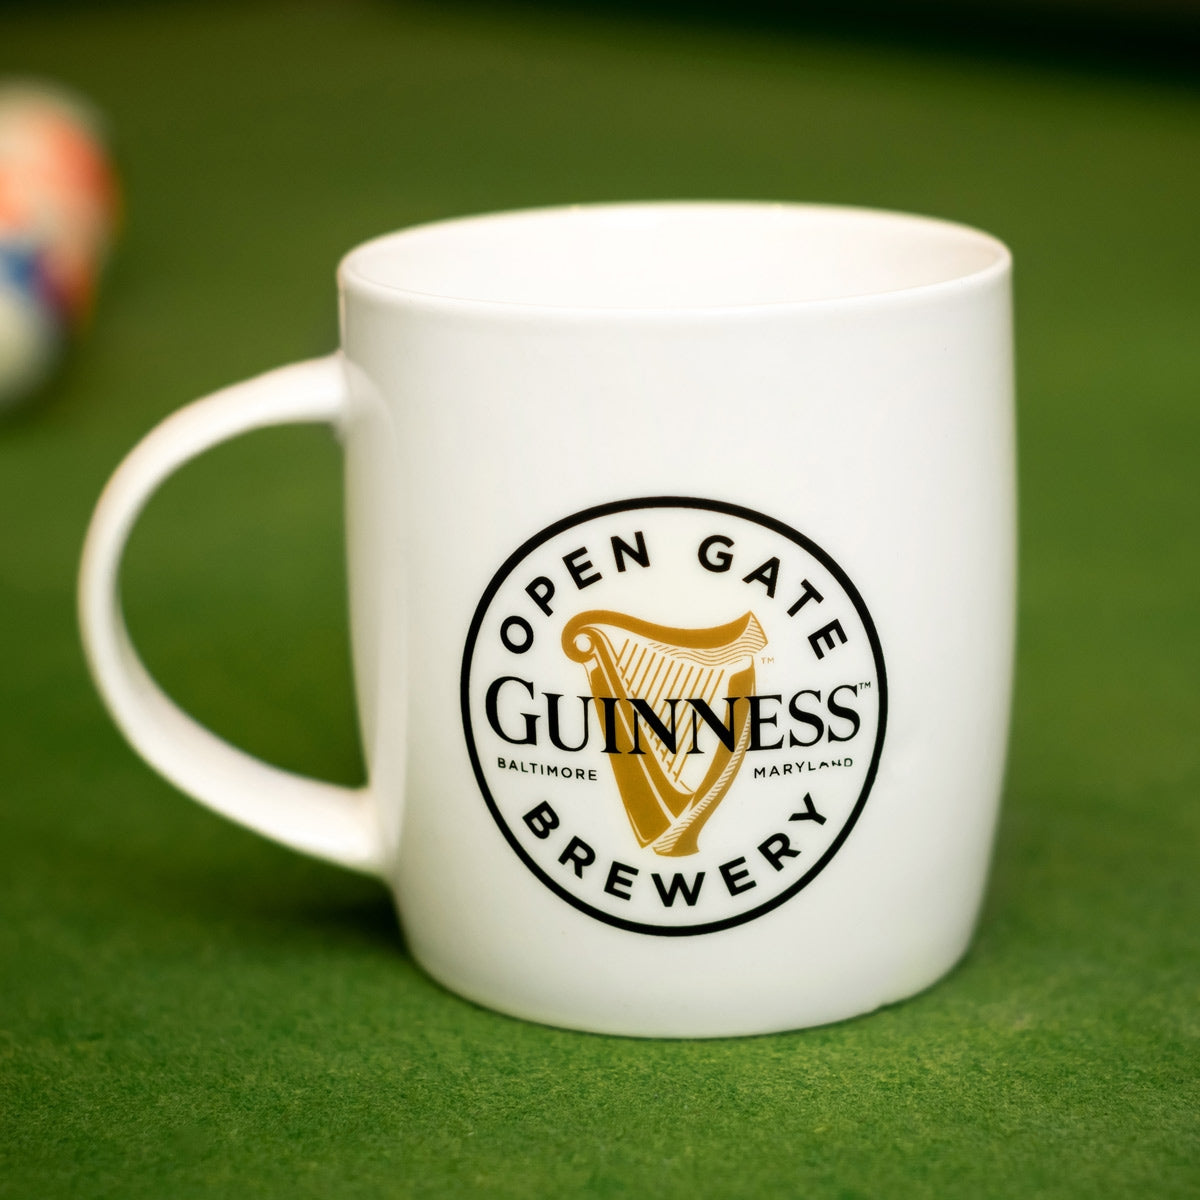 Official Merchandise Guinness Open Gate Brewery White Ceramic Mug by Guinness